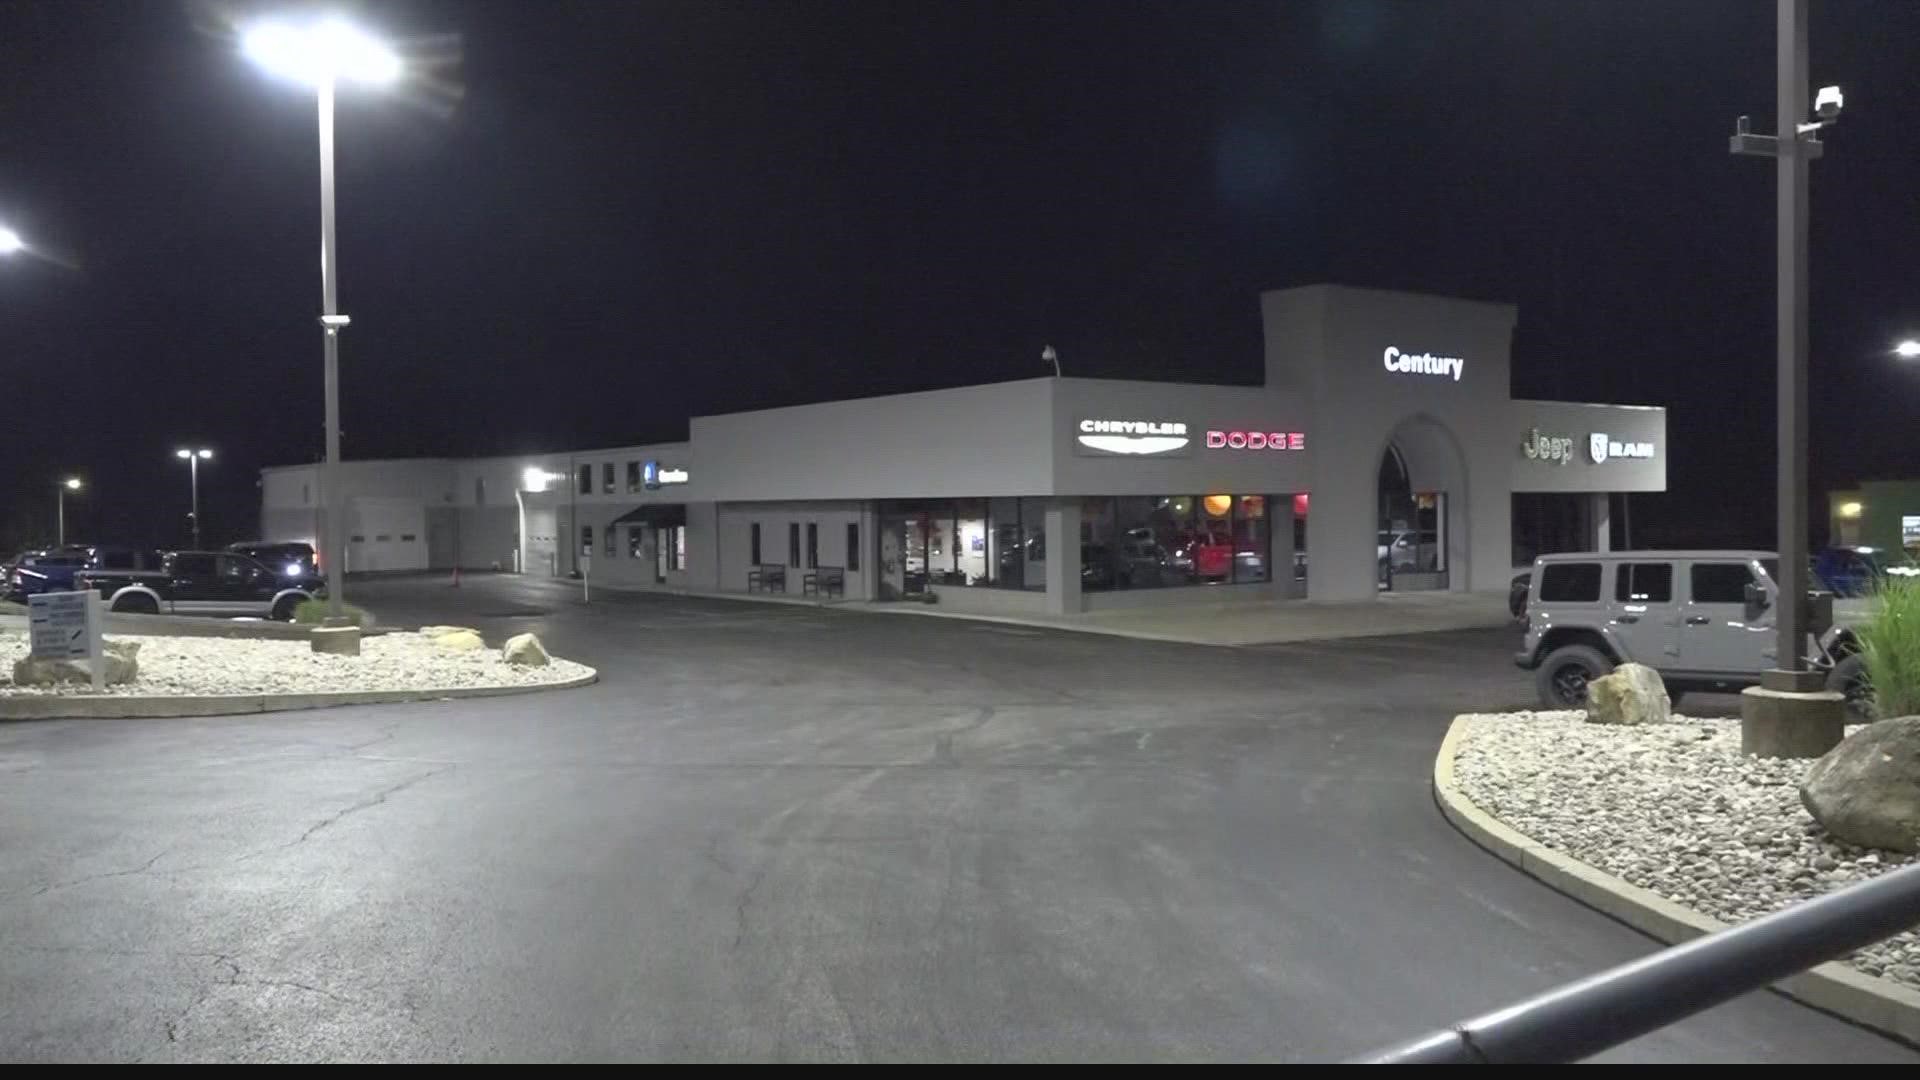 Clean up is underway at the Century Motors dealership in Wentzville where police are investigating a break in. We’re working to learn more details.